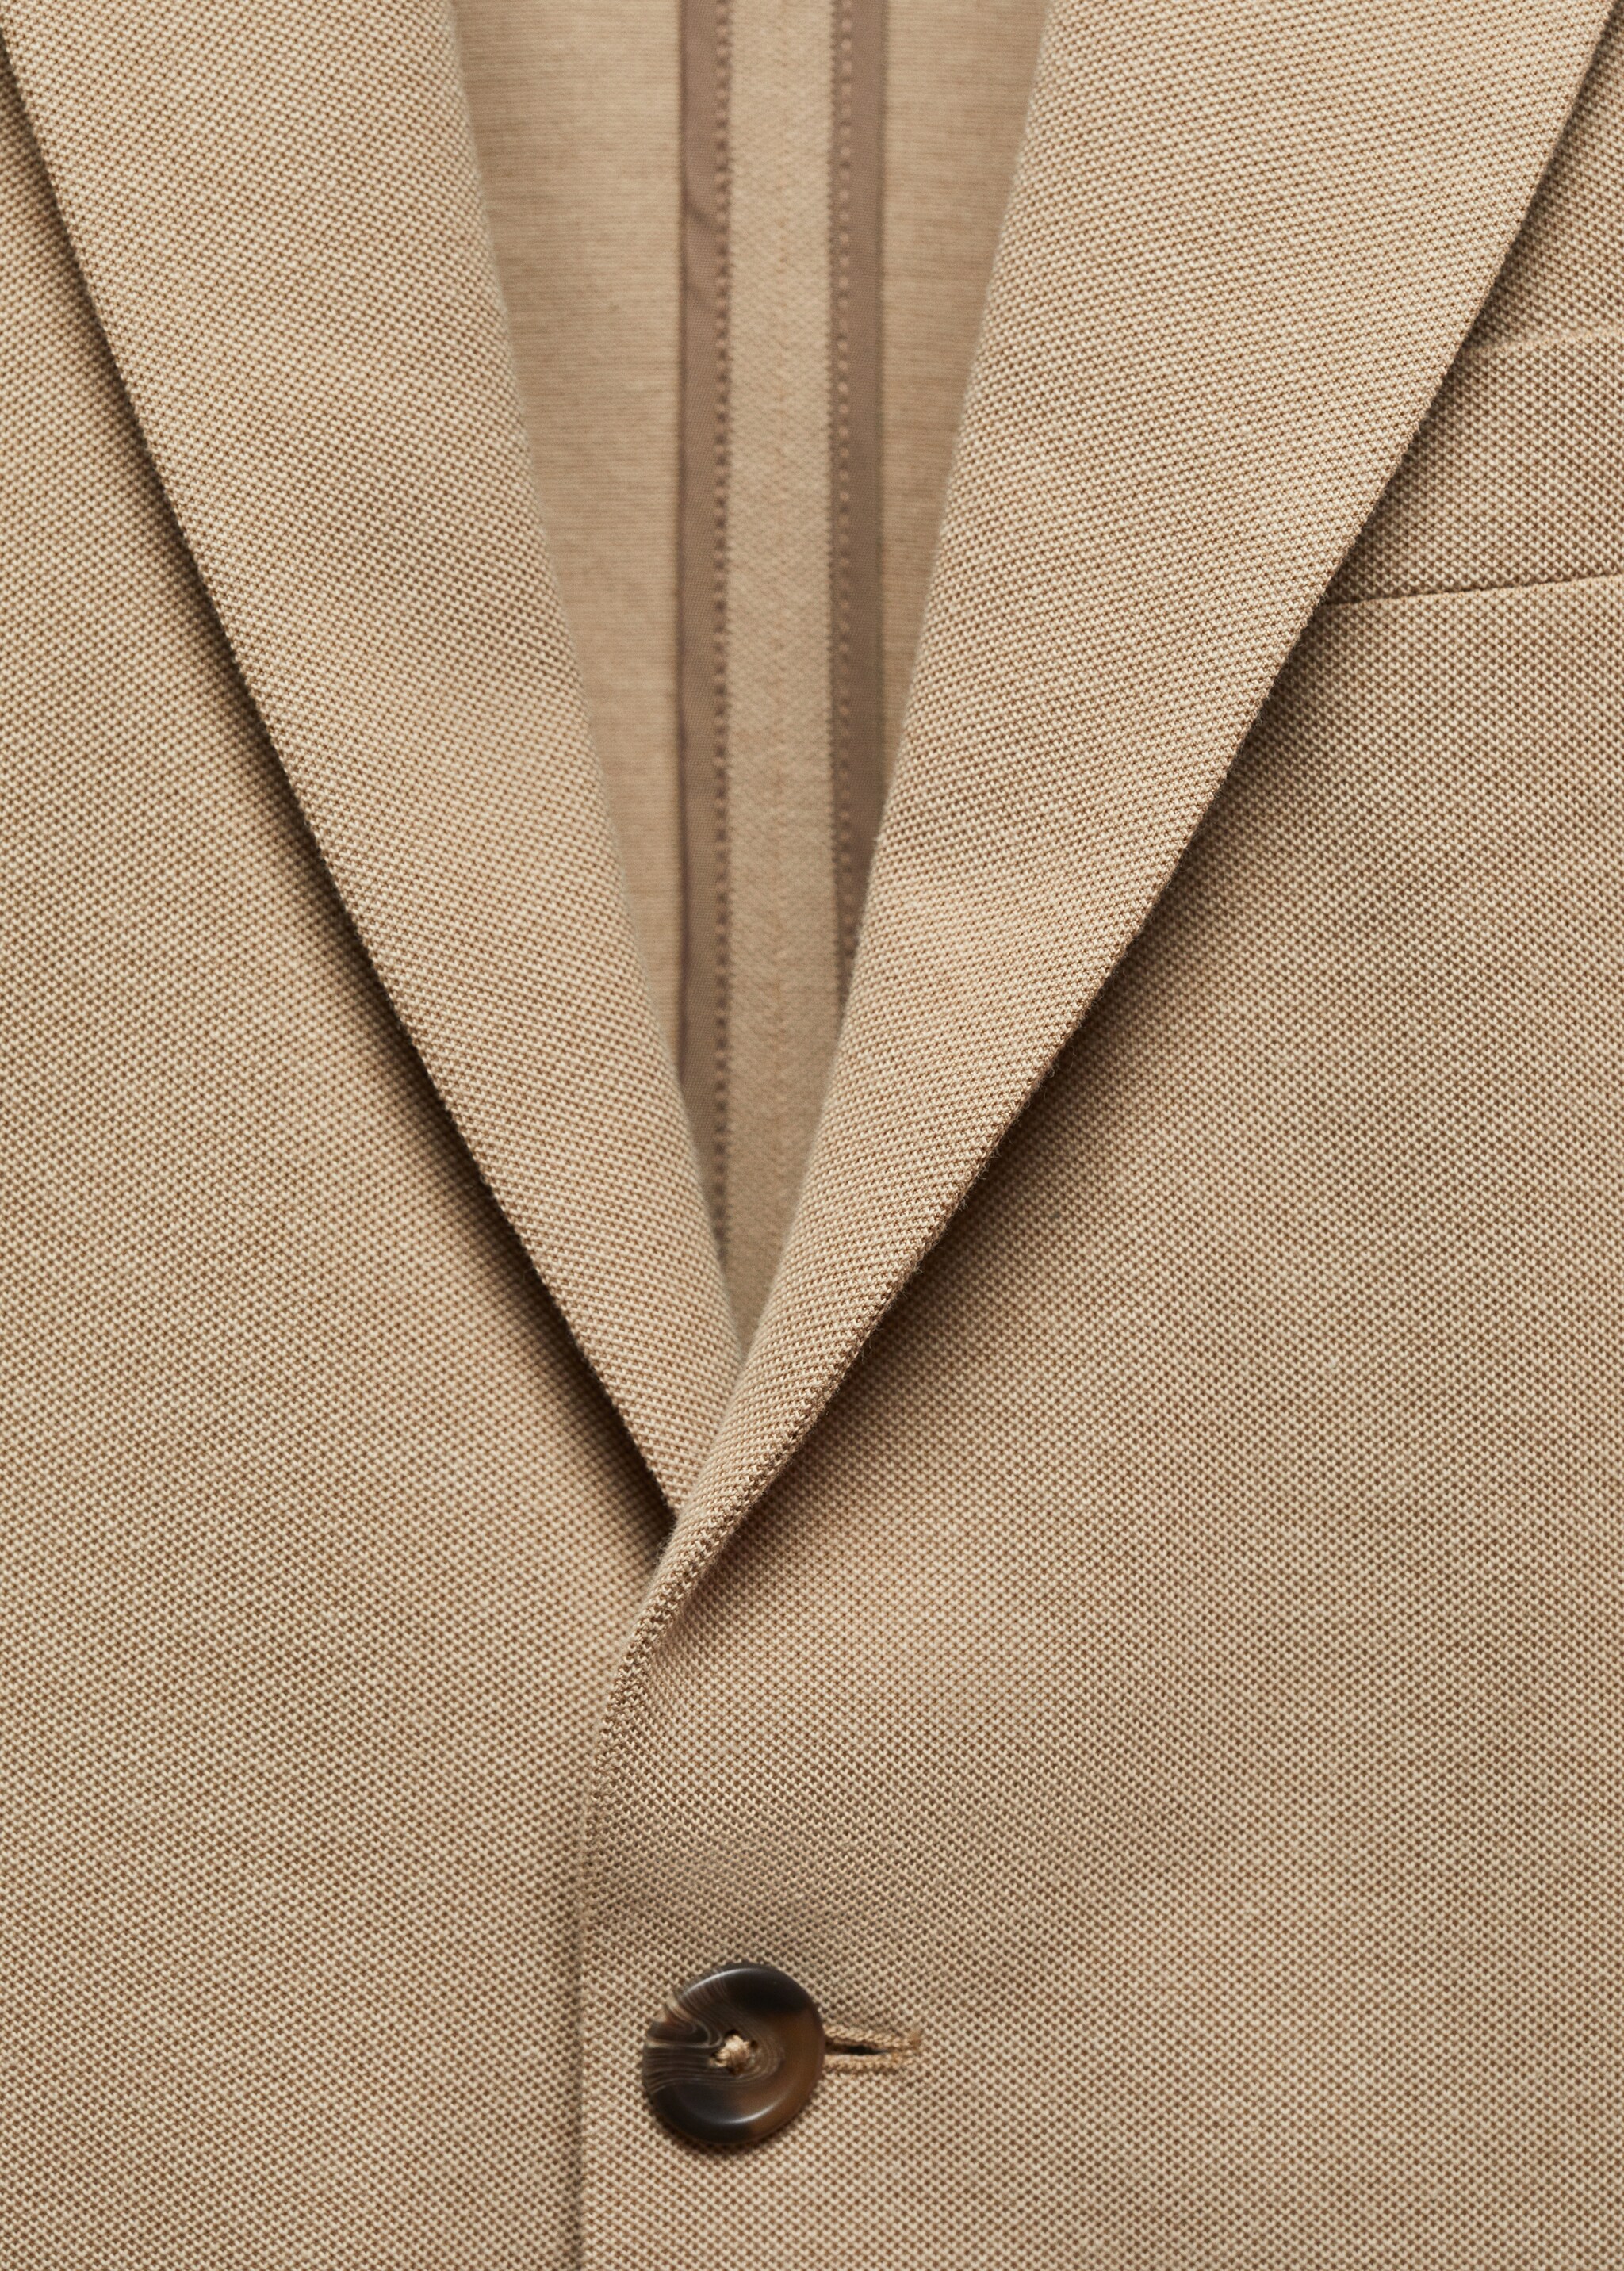 Structured slim fit cotton blazer - Details of the article 8